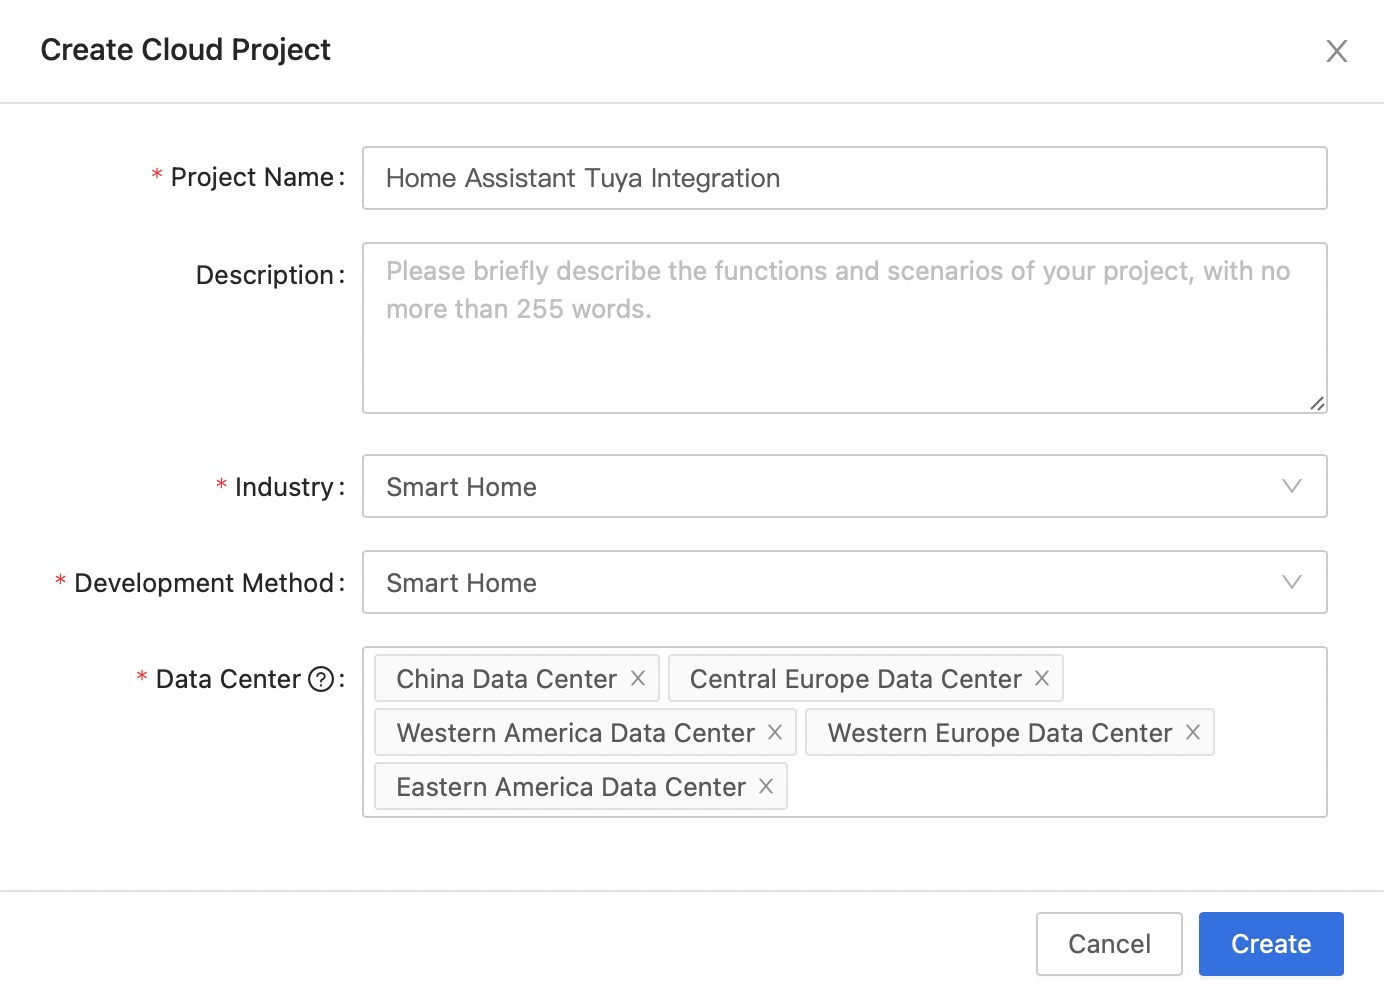 Home Assistant Tuya Integration - Create Cloud Project